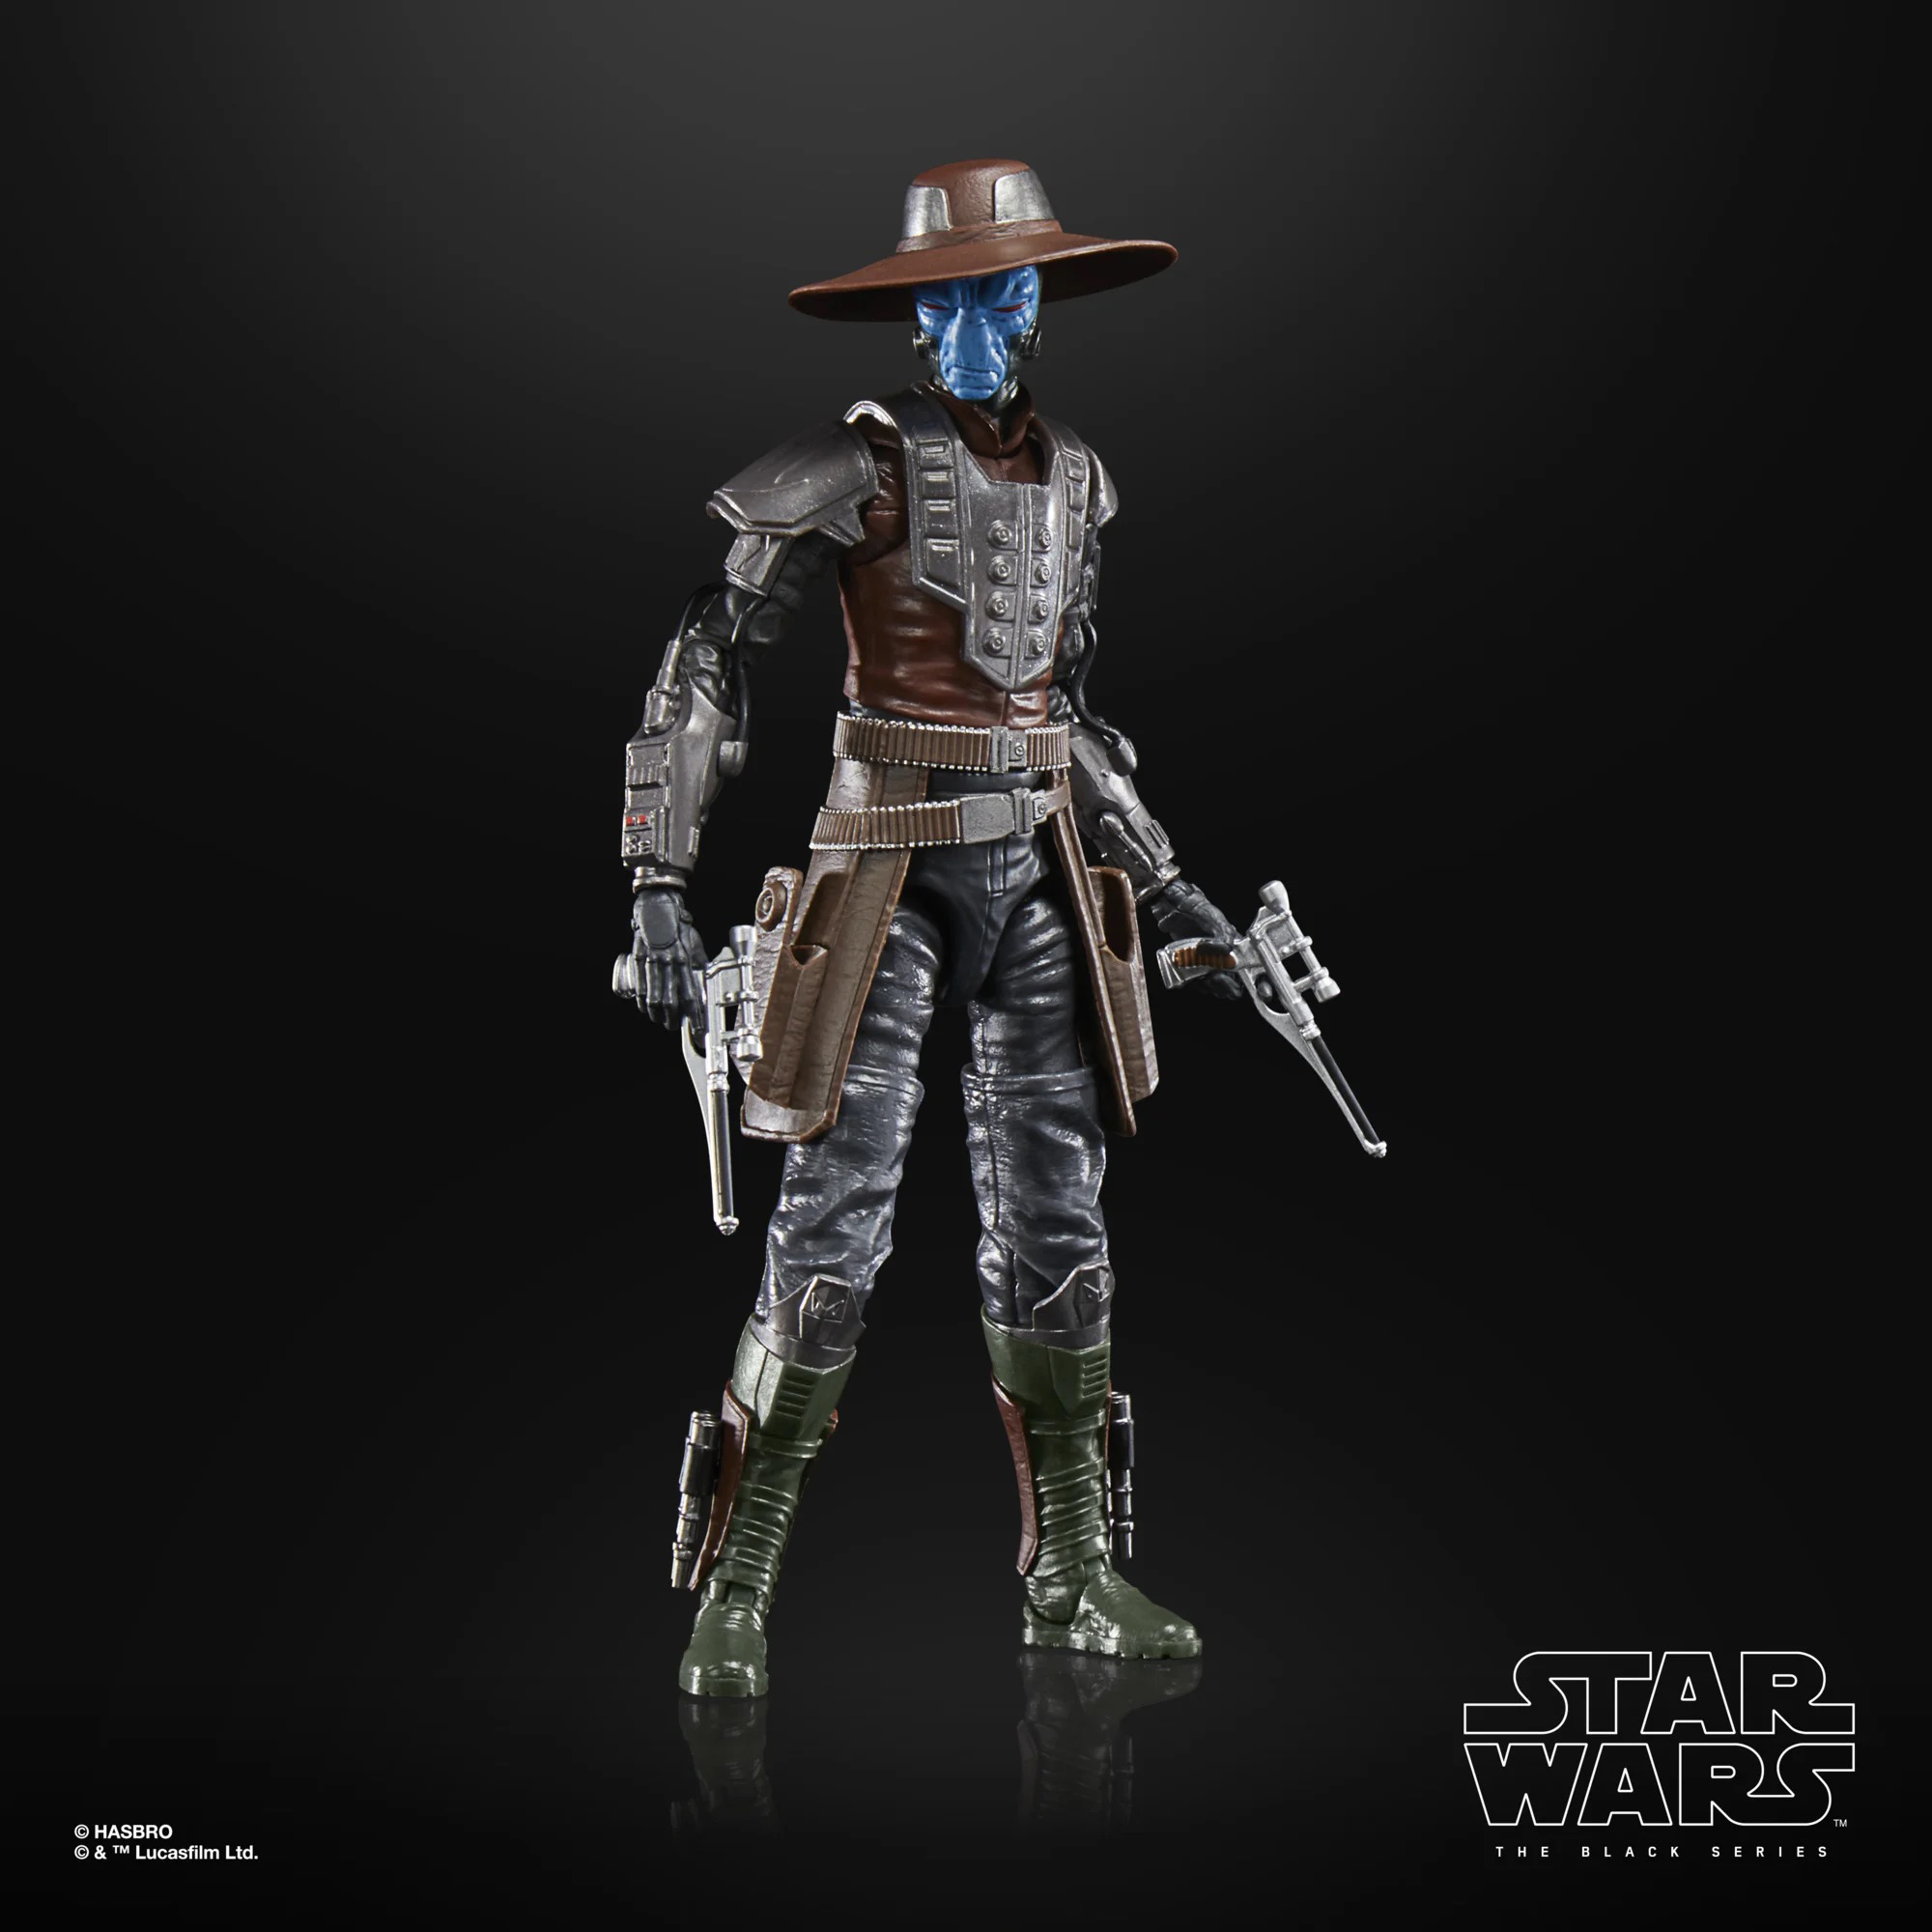 Hasbro Star Wars The Black Series 6" Cad Bane Action Figure for sale online 